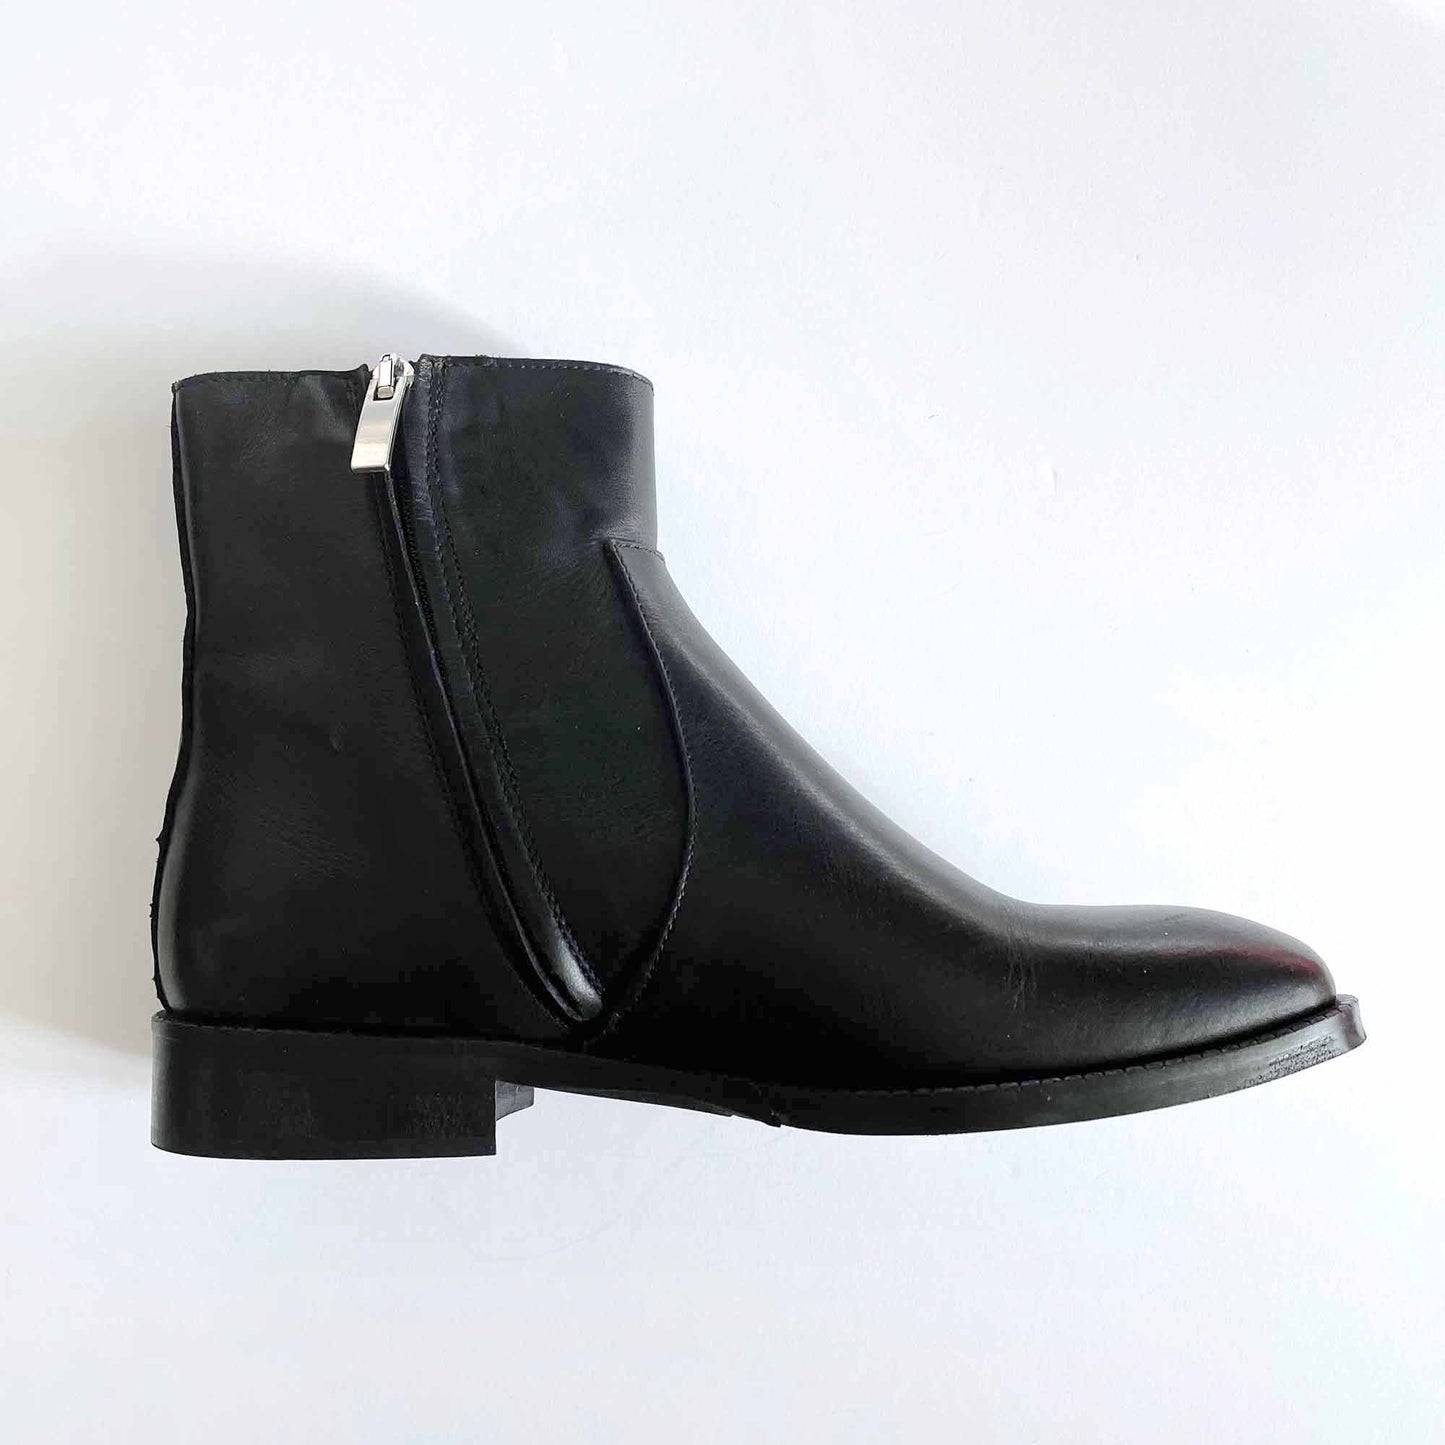 ron white black leather flat ankle boots - size 35